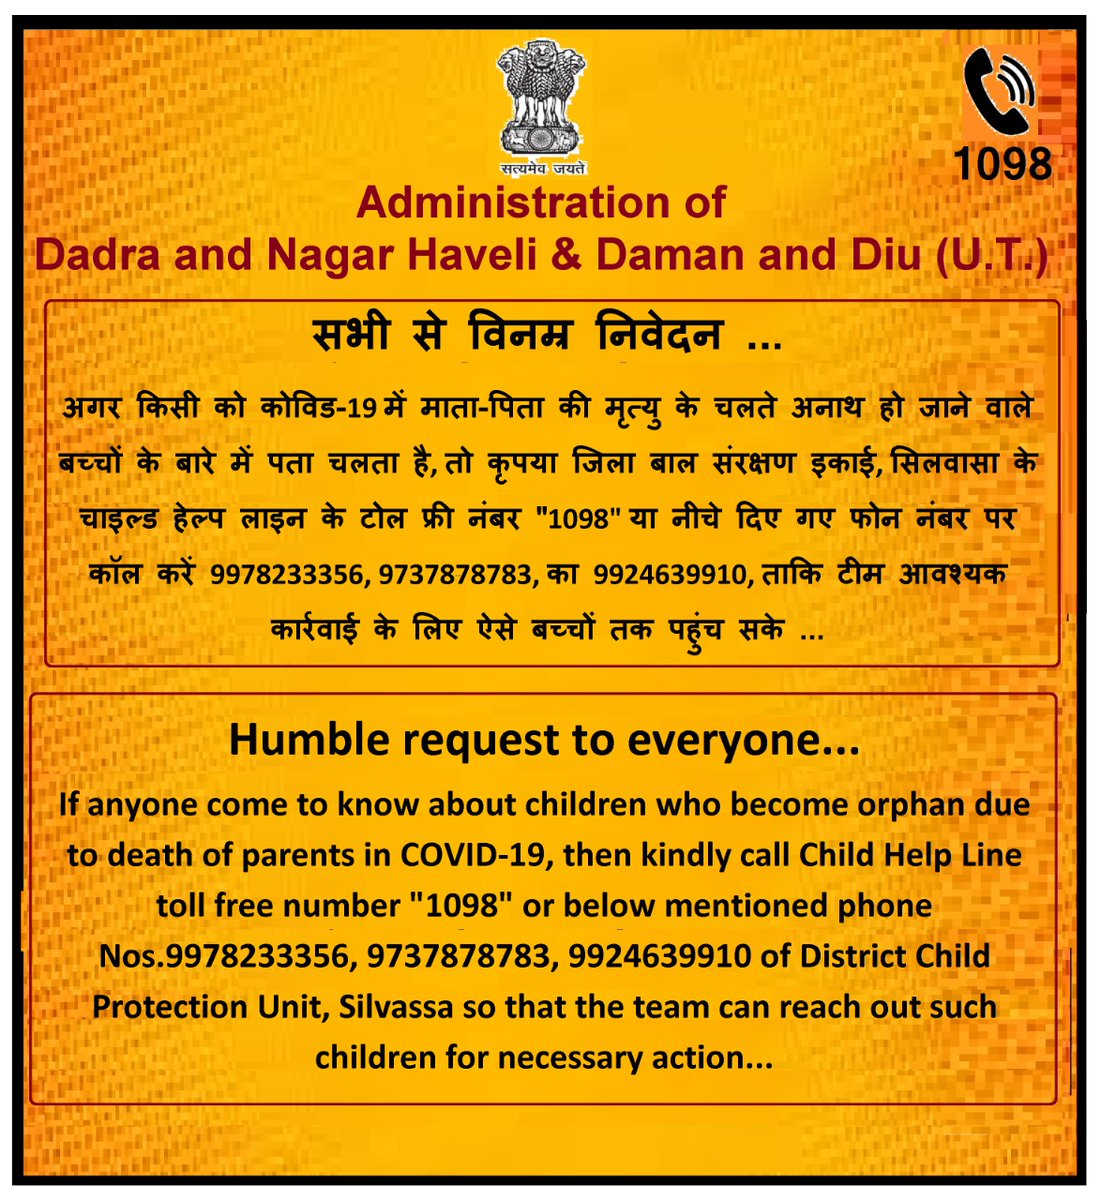 This is an initiative by the District Administration of DNH.

To inform about any child who became orphan as their parents died because of Covid-19, you can contact either on #ChildHelpLine -1098 or 9978233356, 9924639910, 9737878783.